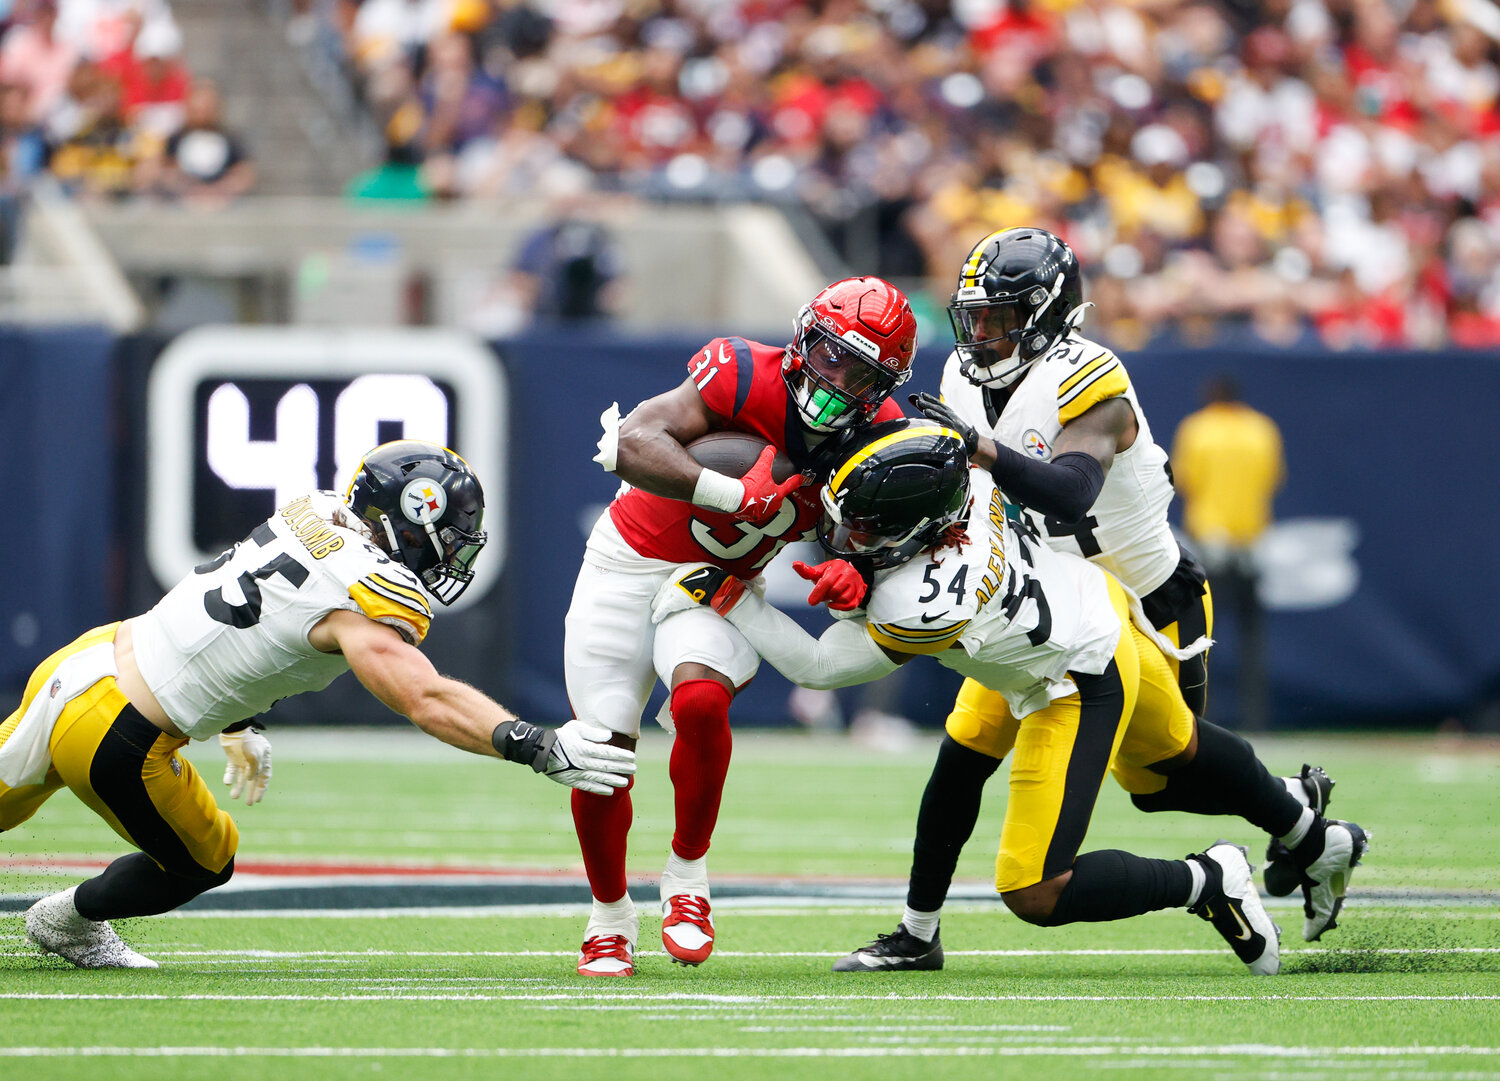 Texans running back Dameon Pierce (31) carries the ball through contact with Steelers linebackers Cole Holcomb (55) and Kwon Alexander (54 during an NFL game between the Texans and the Steelers on October 1, 2023 in Houston.